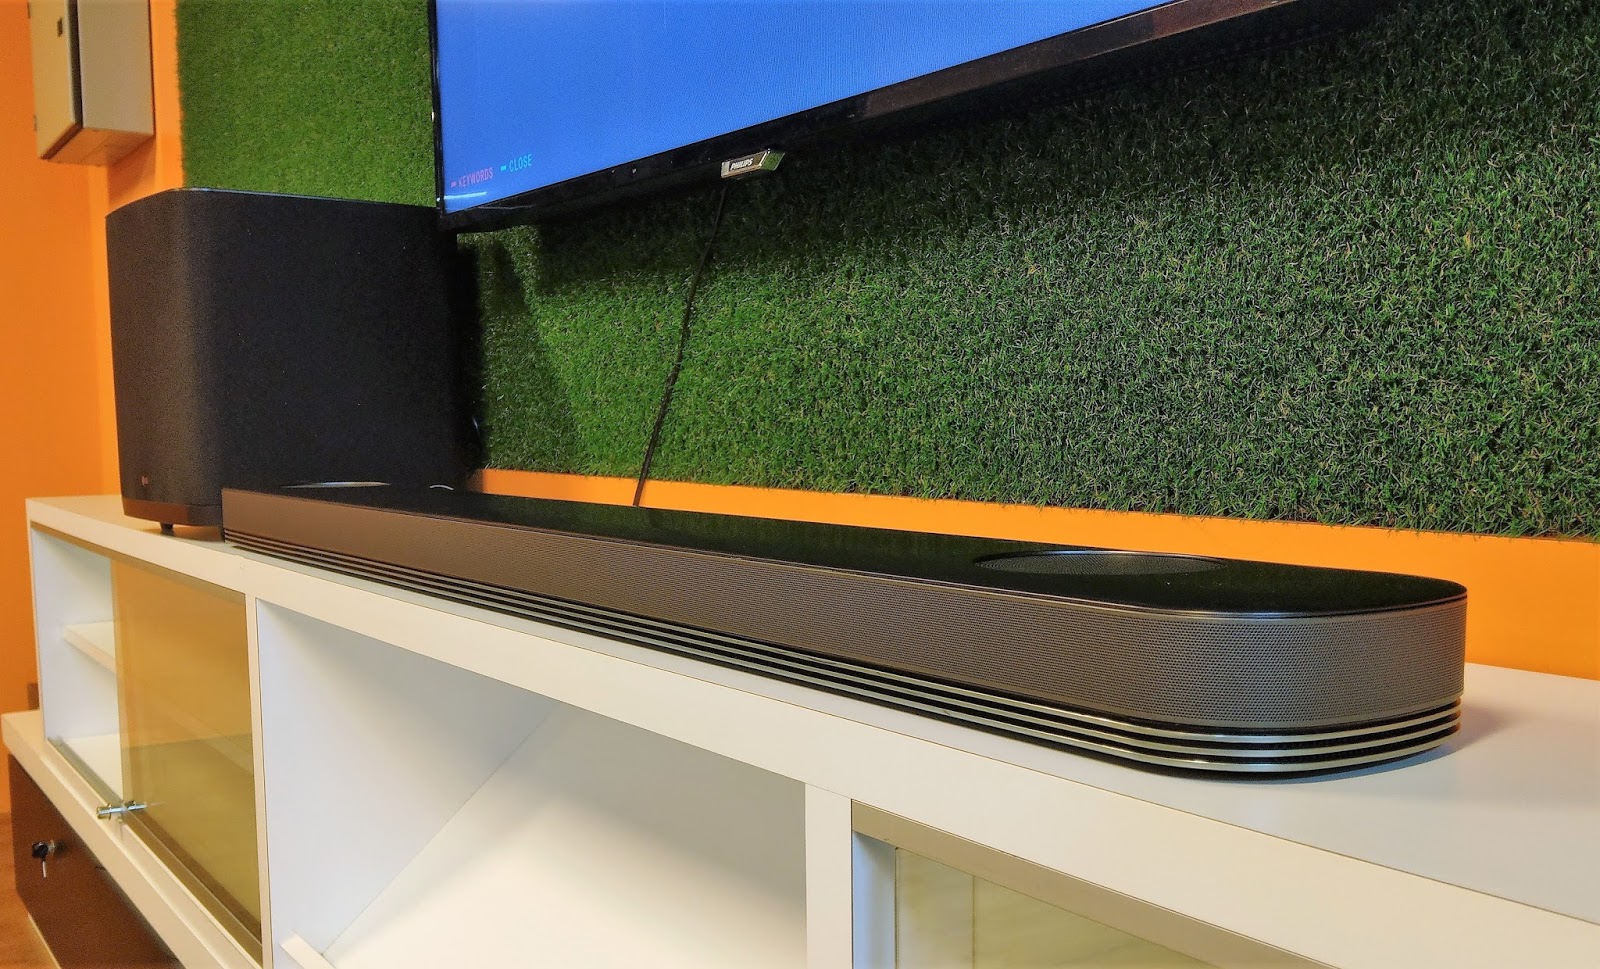 Dolby Atmos for your Home Theatre - Here's the LG SJ9 High Audio Sound Bar - Tech Revolutionist